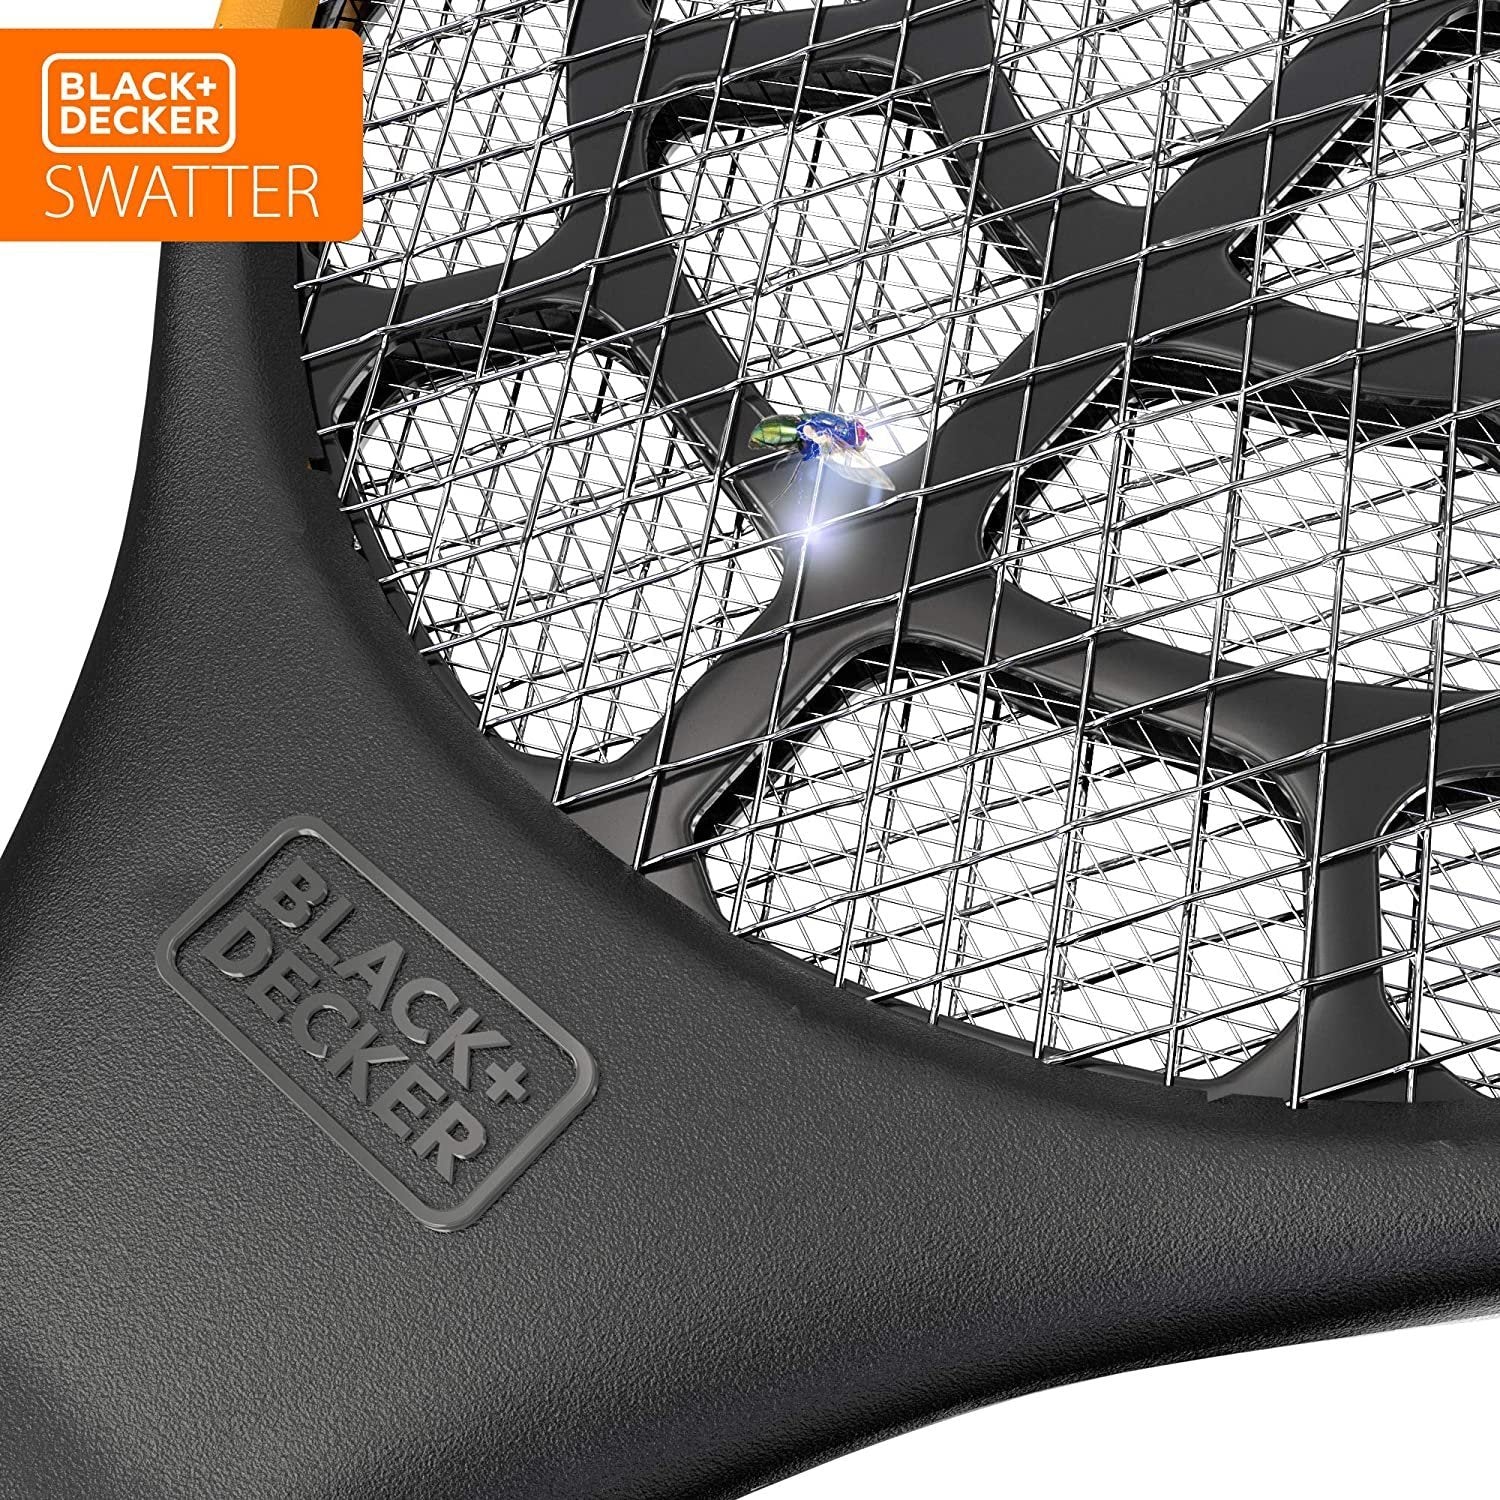 Black & Decker Electric Fly Swatter Tennis Racket | PRO 2.0 | Indoor & Outdoor | Battery Powered | Non-Toxic, Safe for Humans & Pets